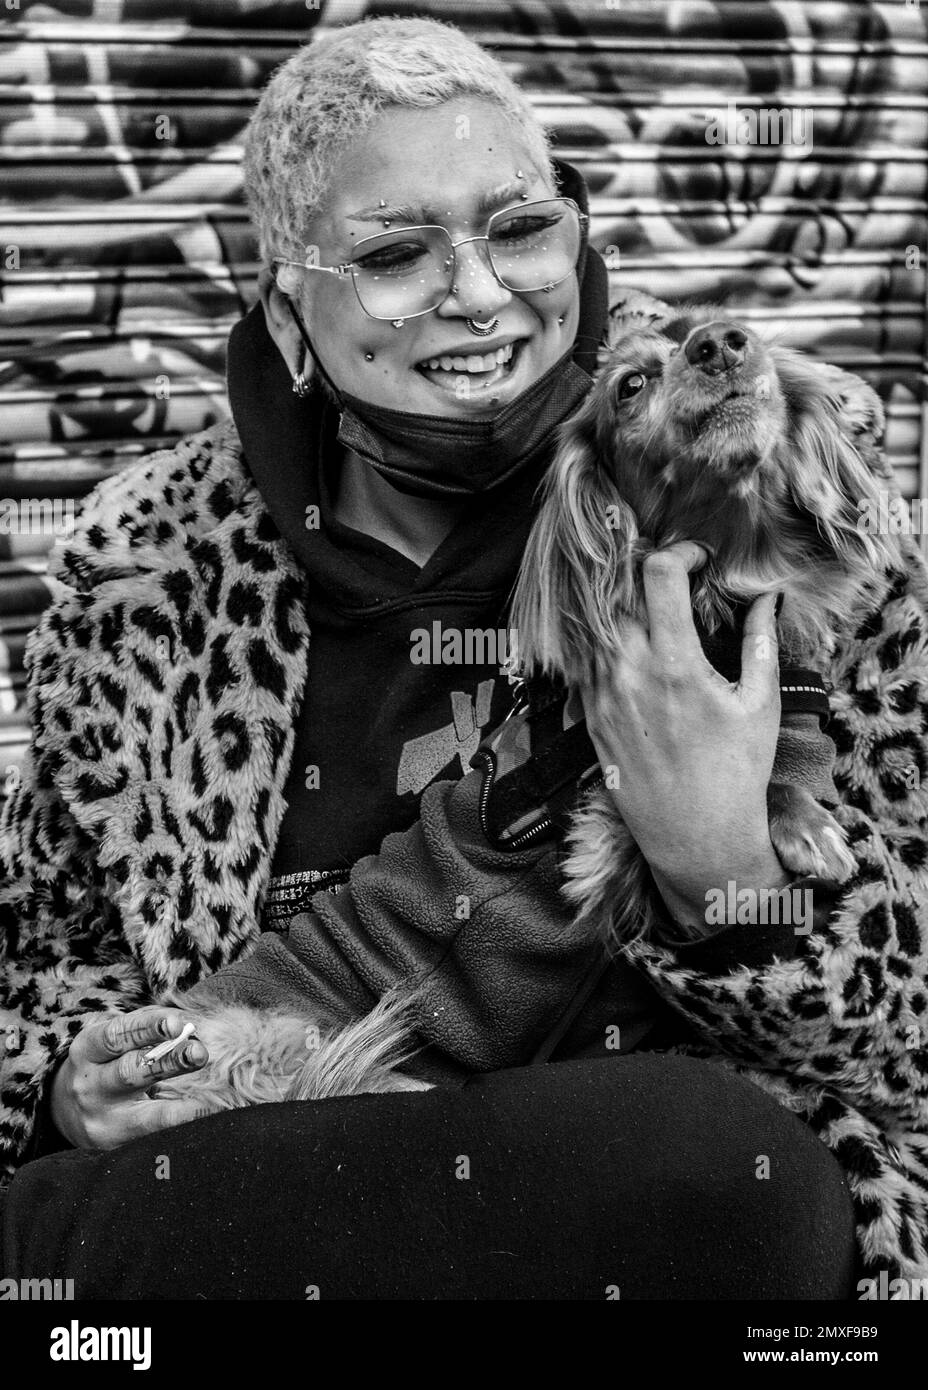 Female street trader with pink hair wearing leopard print coat, Doc Marten boots holding a dog, smiling into camera. Camden market Stock Photo